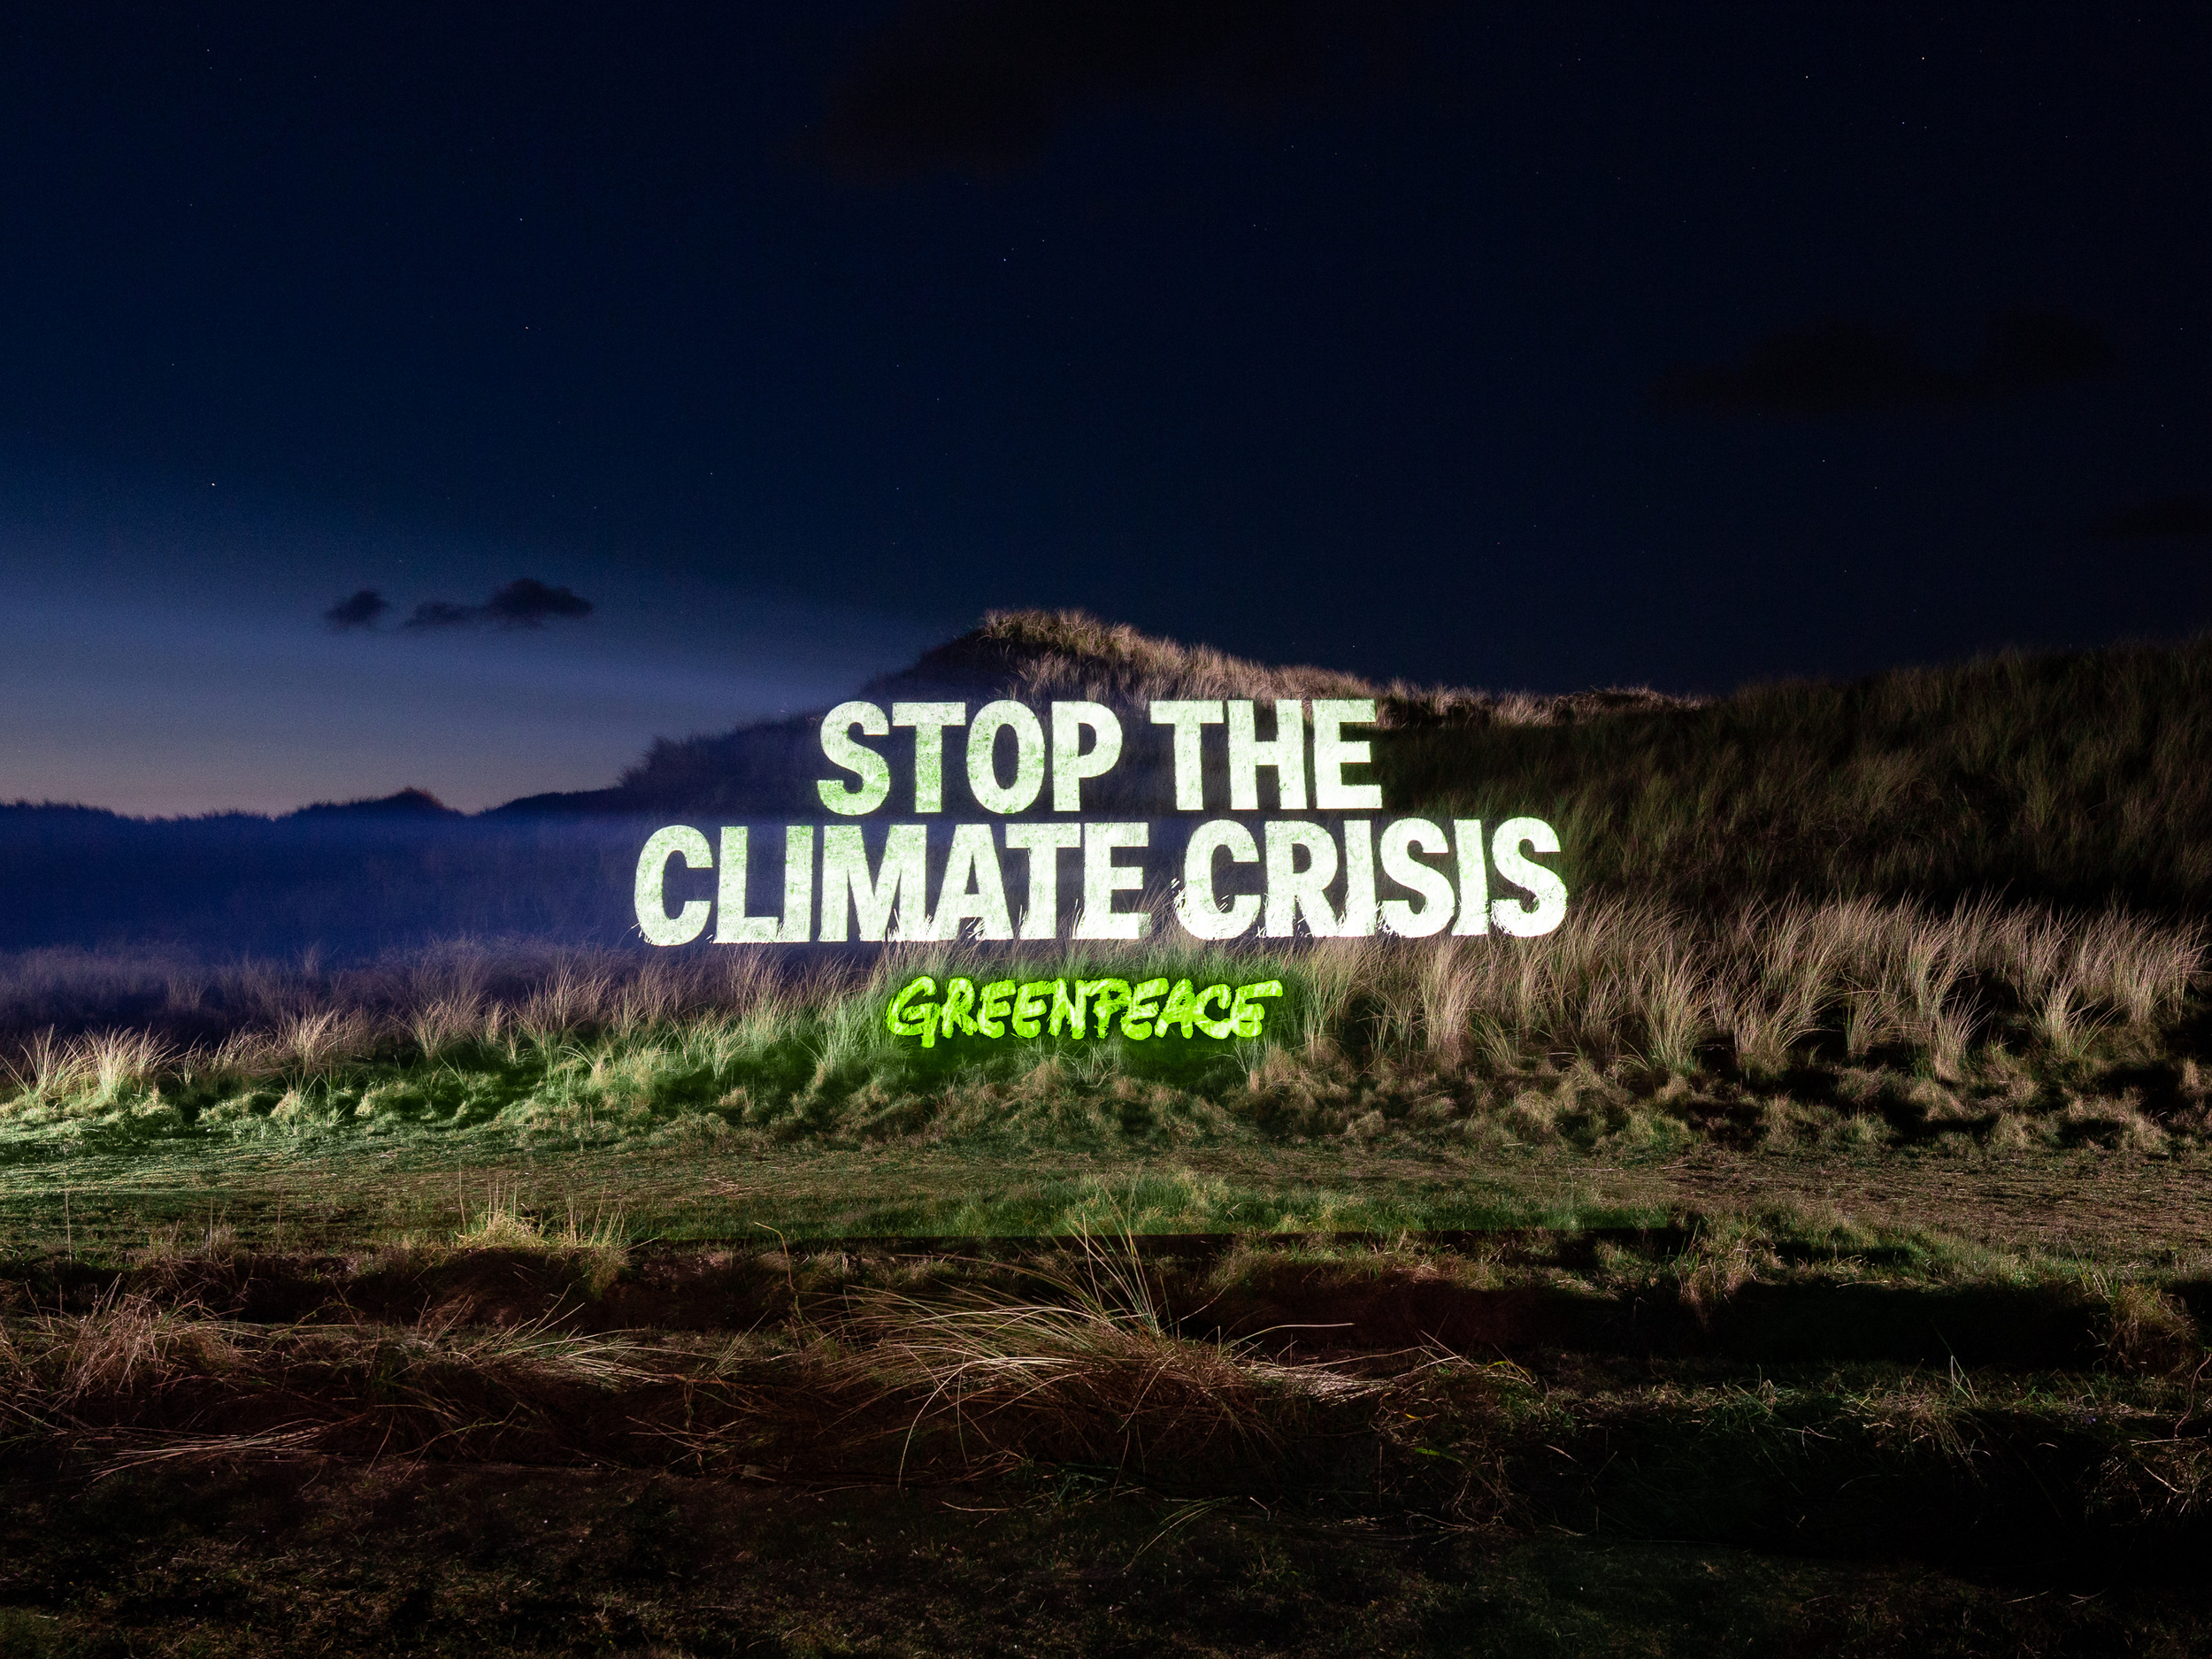 A high-powered projector spells out the message "Stop the climate crisis" onto a beautiful night-time landscape